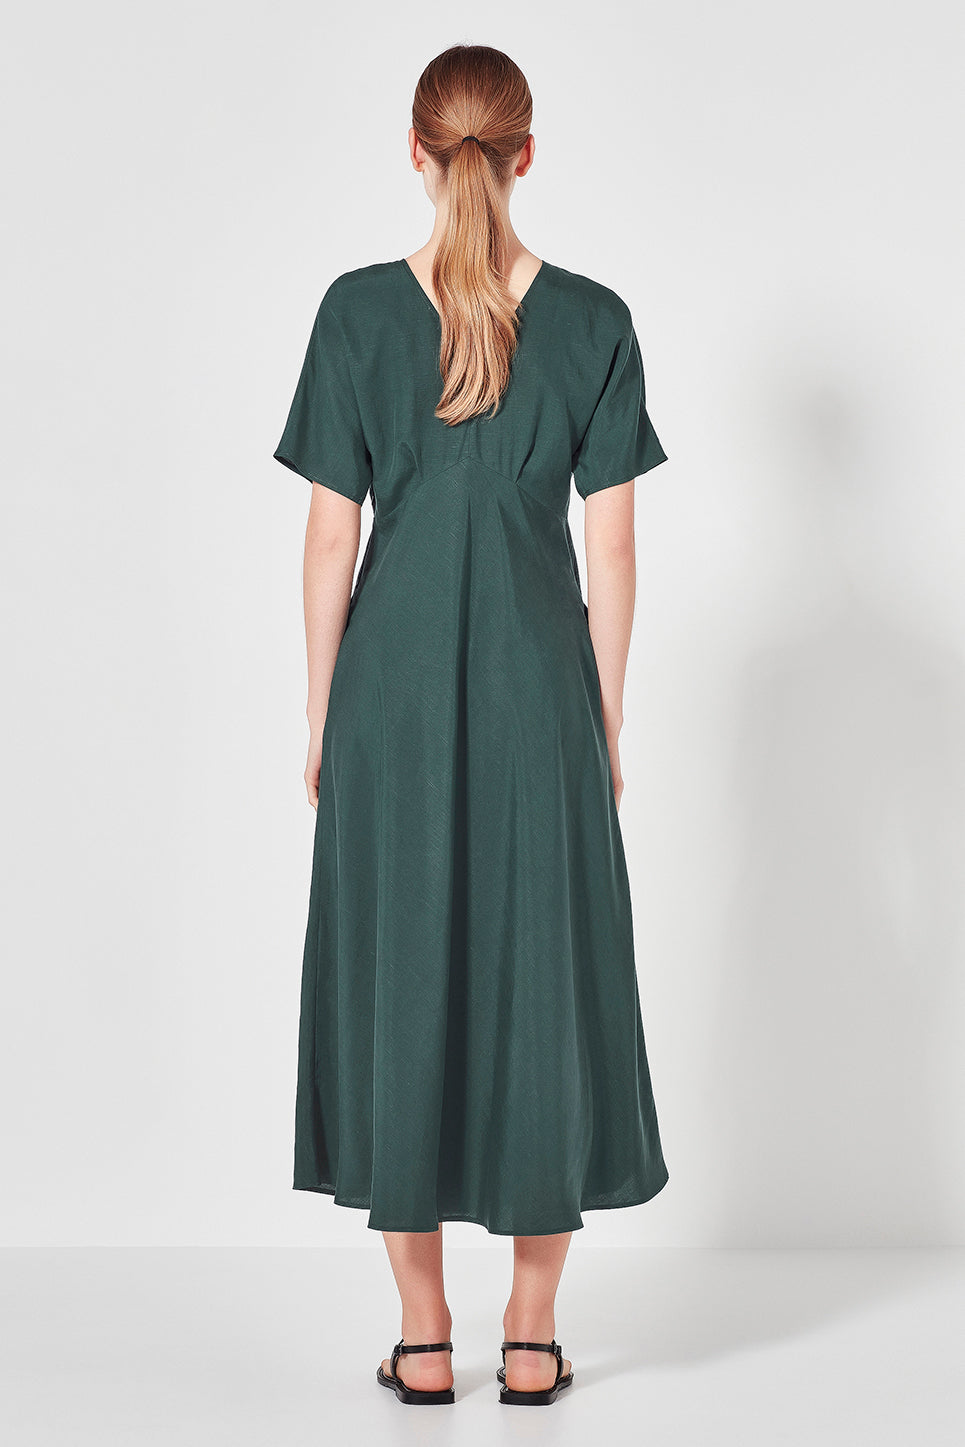 The Evelyn 2-Way Dress in Bottle Green